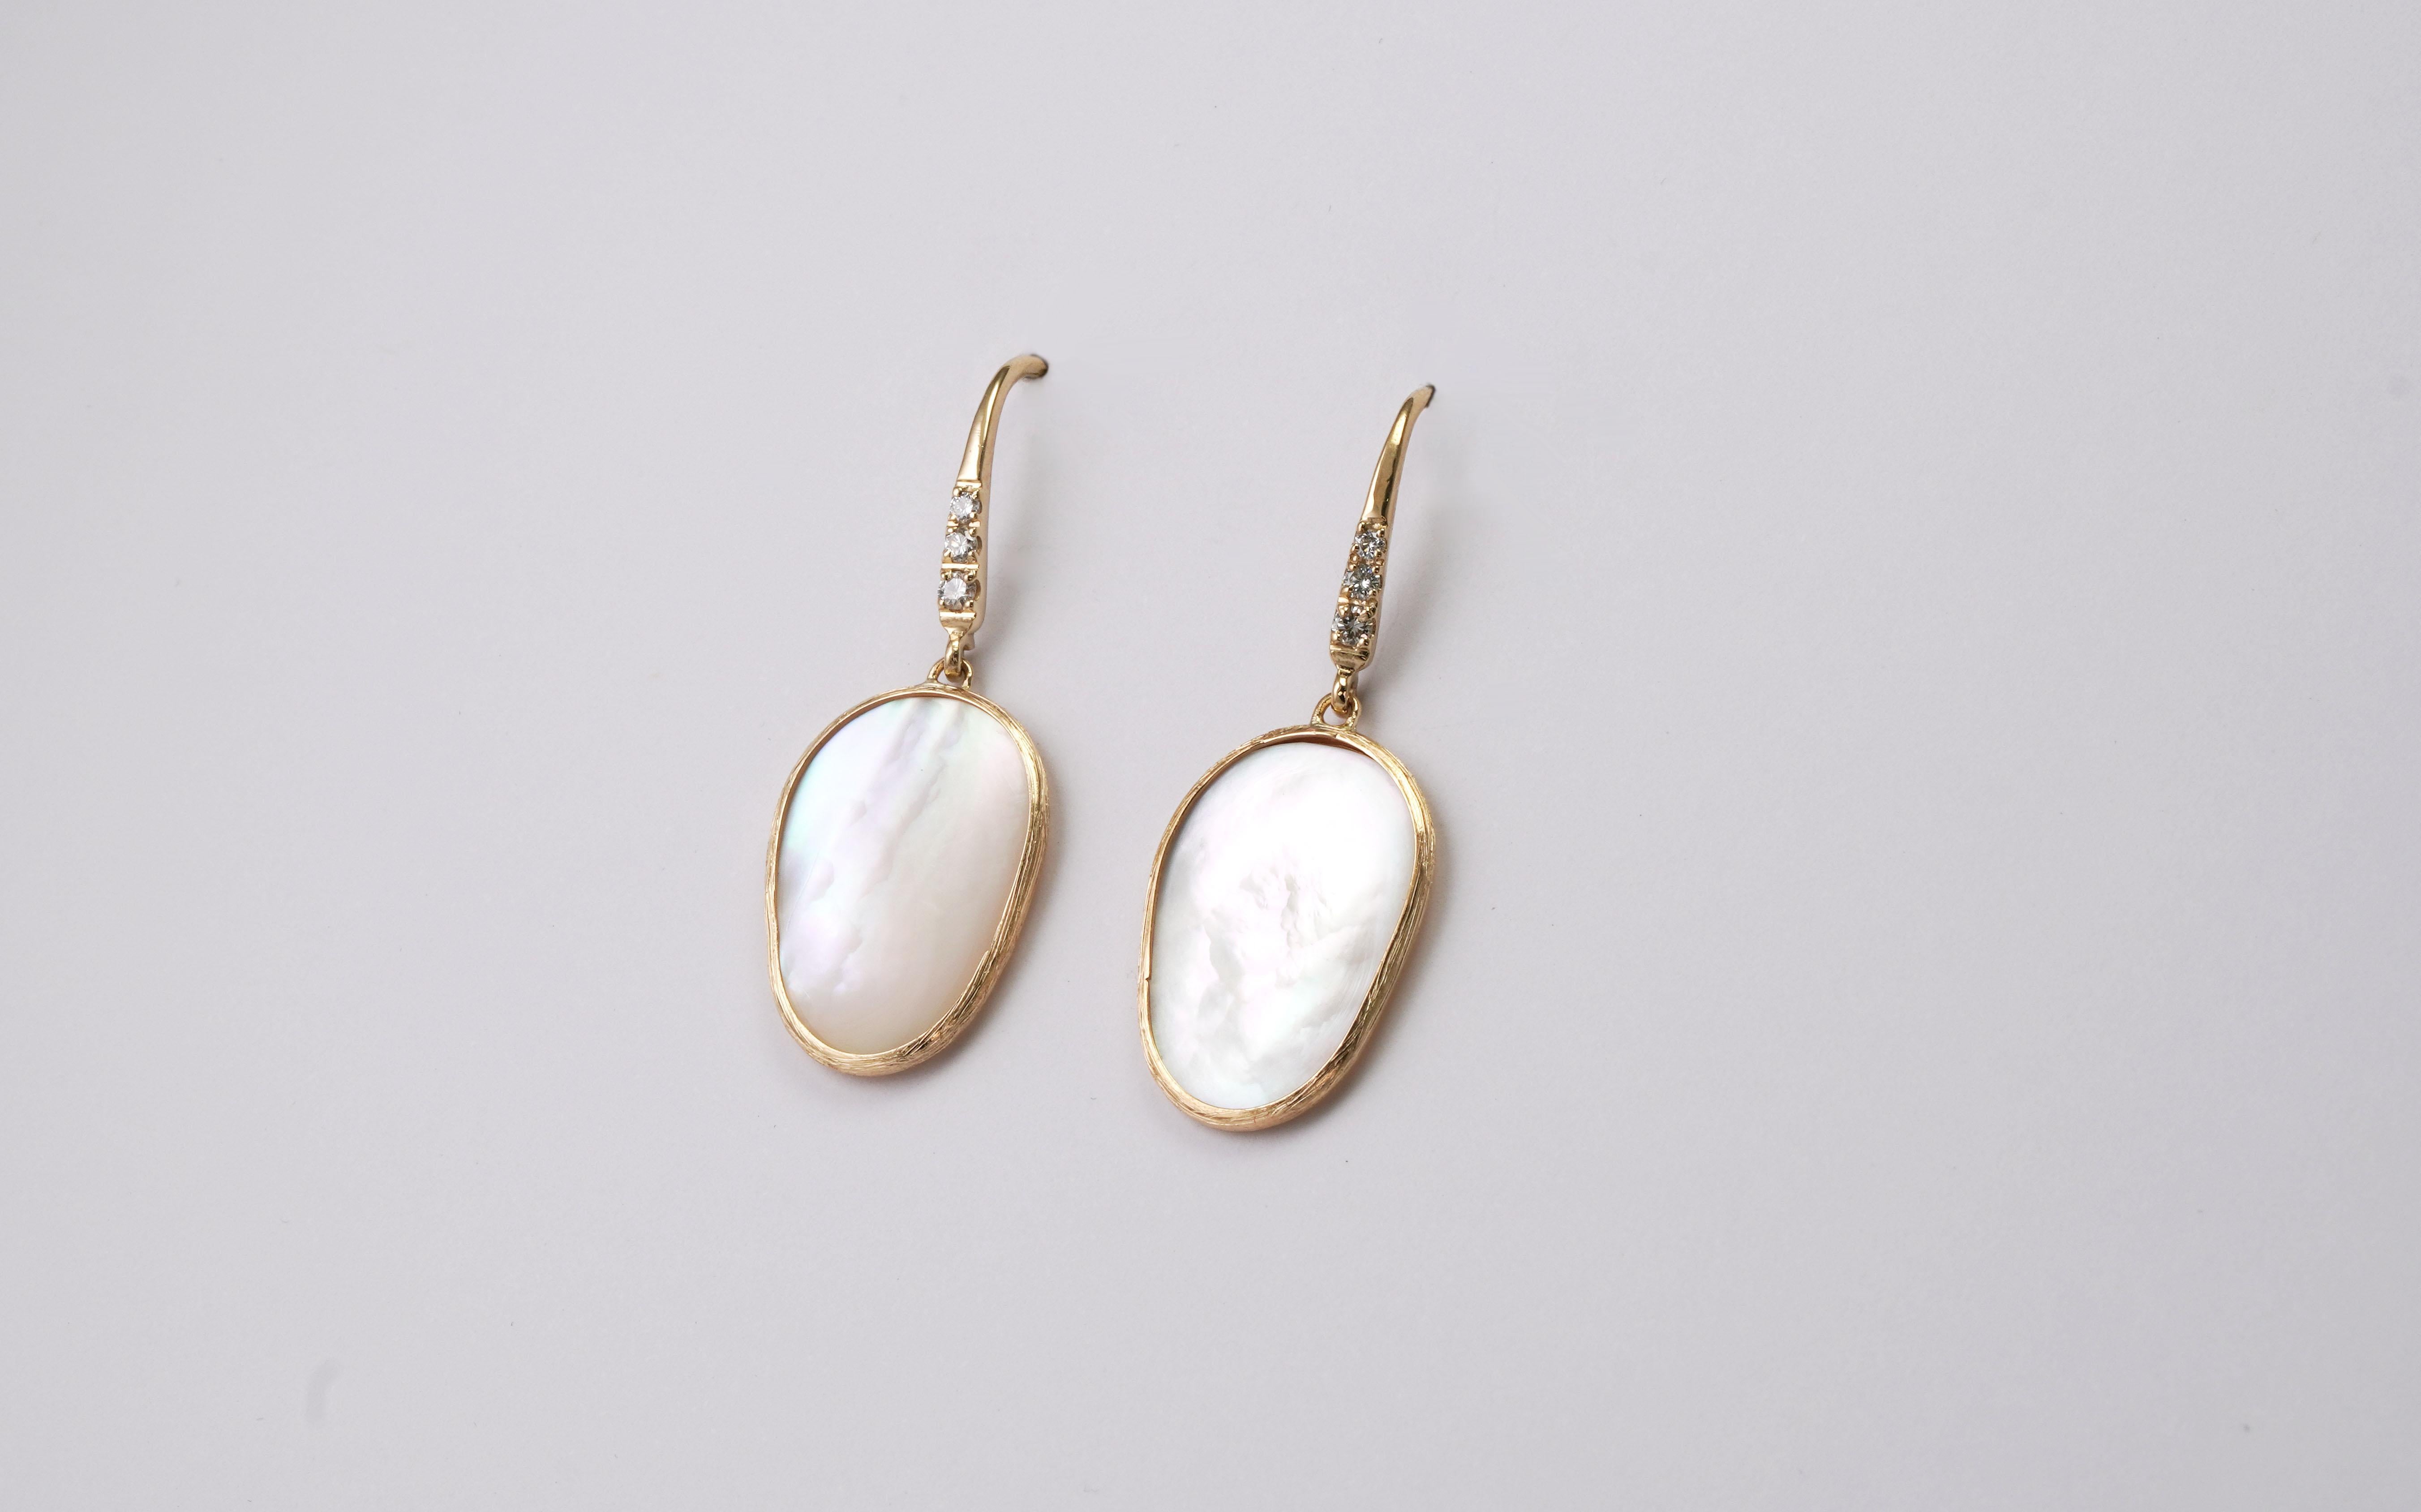 Brilliant Cut 14 Karat Yellow Gold Mother of Pearl Diamond Earrings For Sale